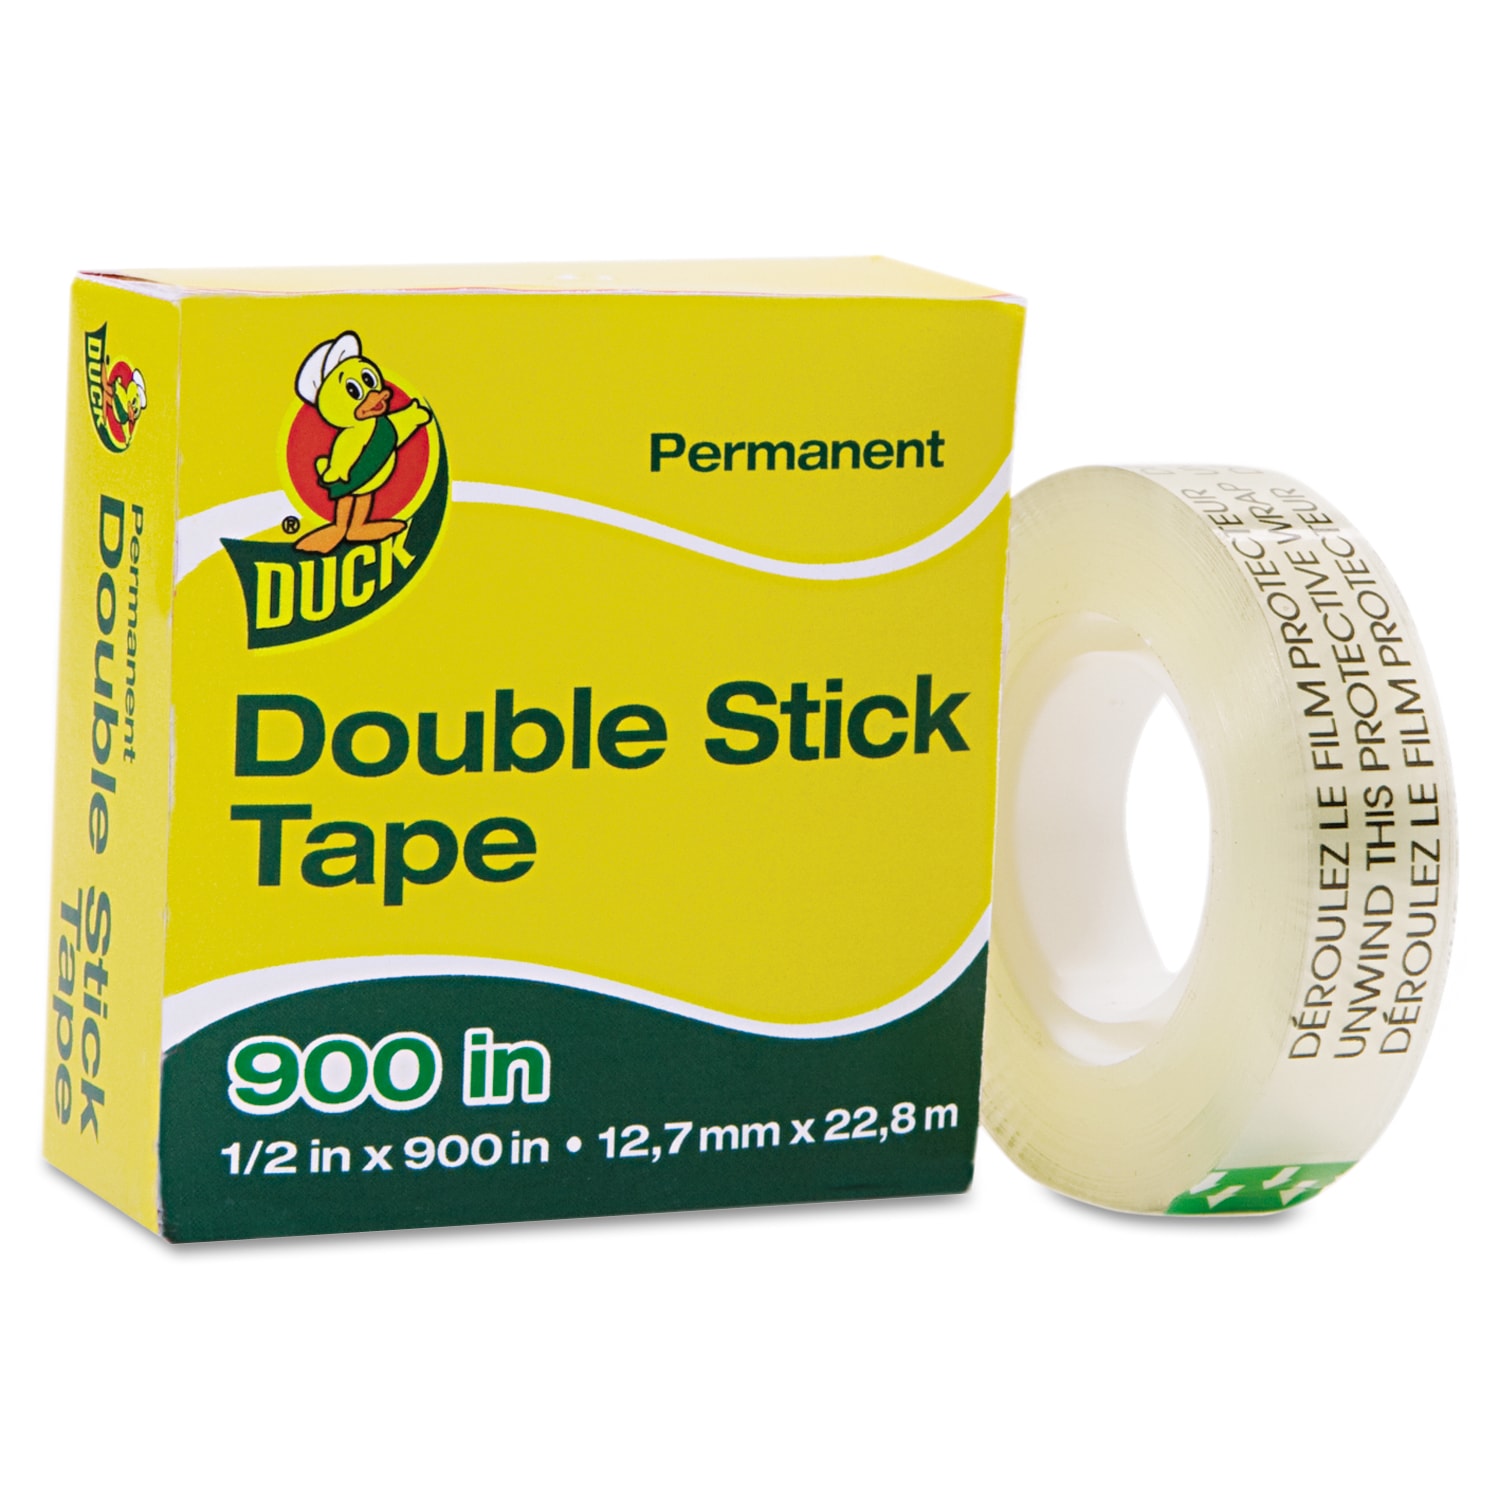 Ace Hardware - Think Duck Tape is only available in silver? Check out these  colors and patterns! This month, get 2 rolls of Duck Tape for $5 at your  local participating Ace.